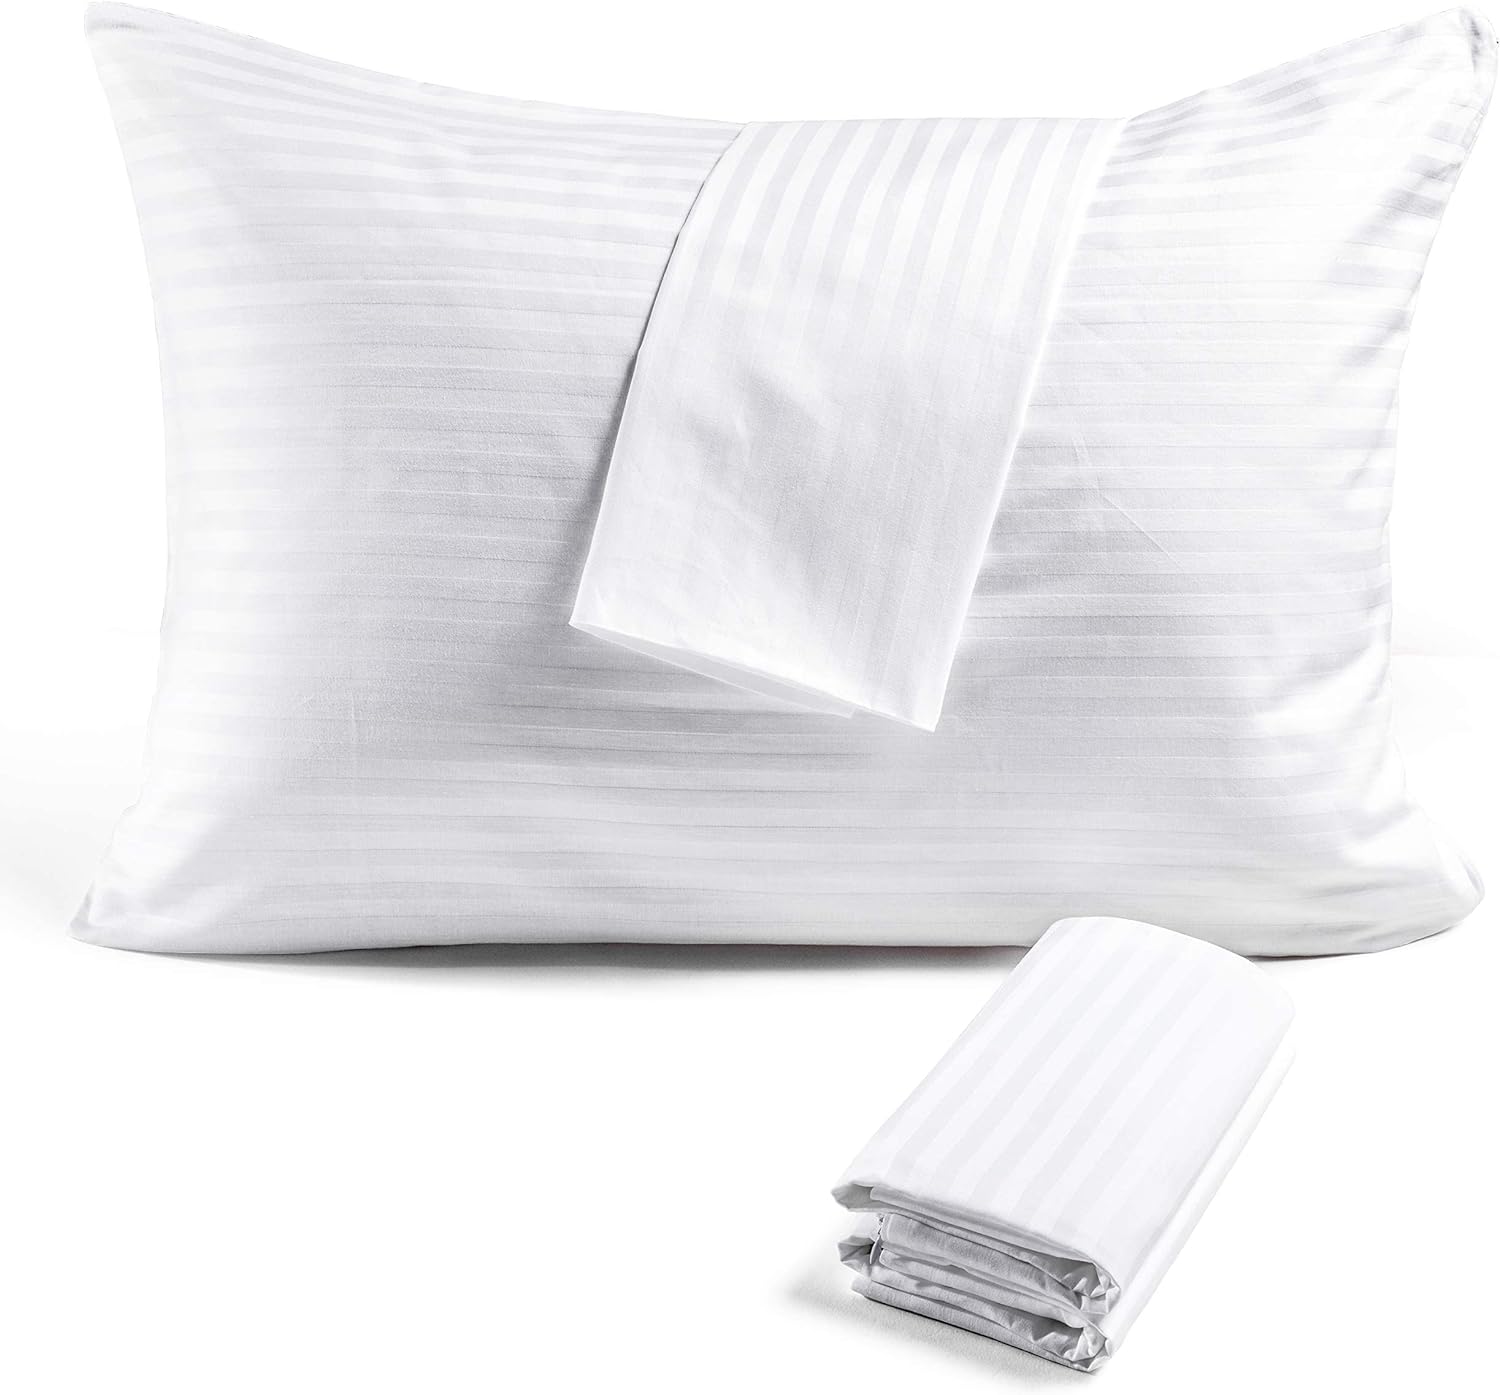 FAUNNA King Size Zippered Pillow Cover 4 Pack - 100% Cotton Soft White Stripes Pillow Protector- Quiet and Comfortable Bed Pillowcase